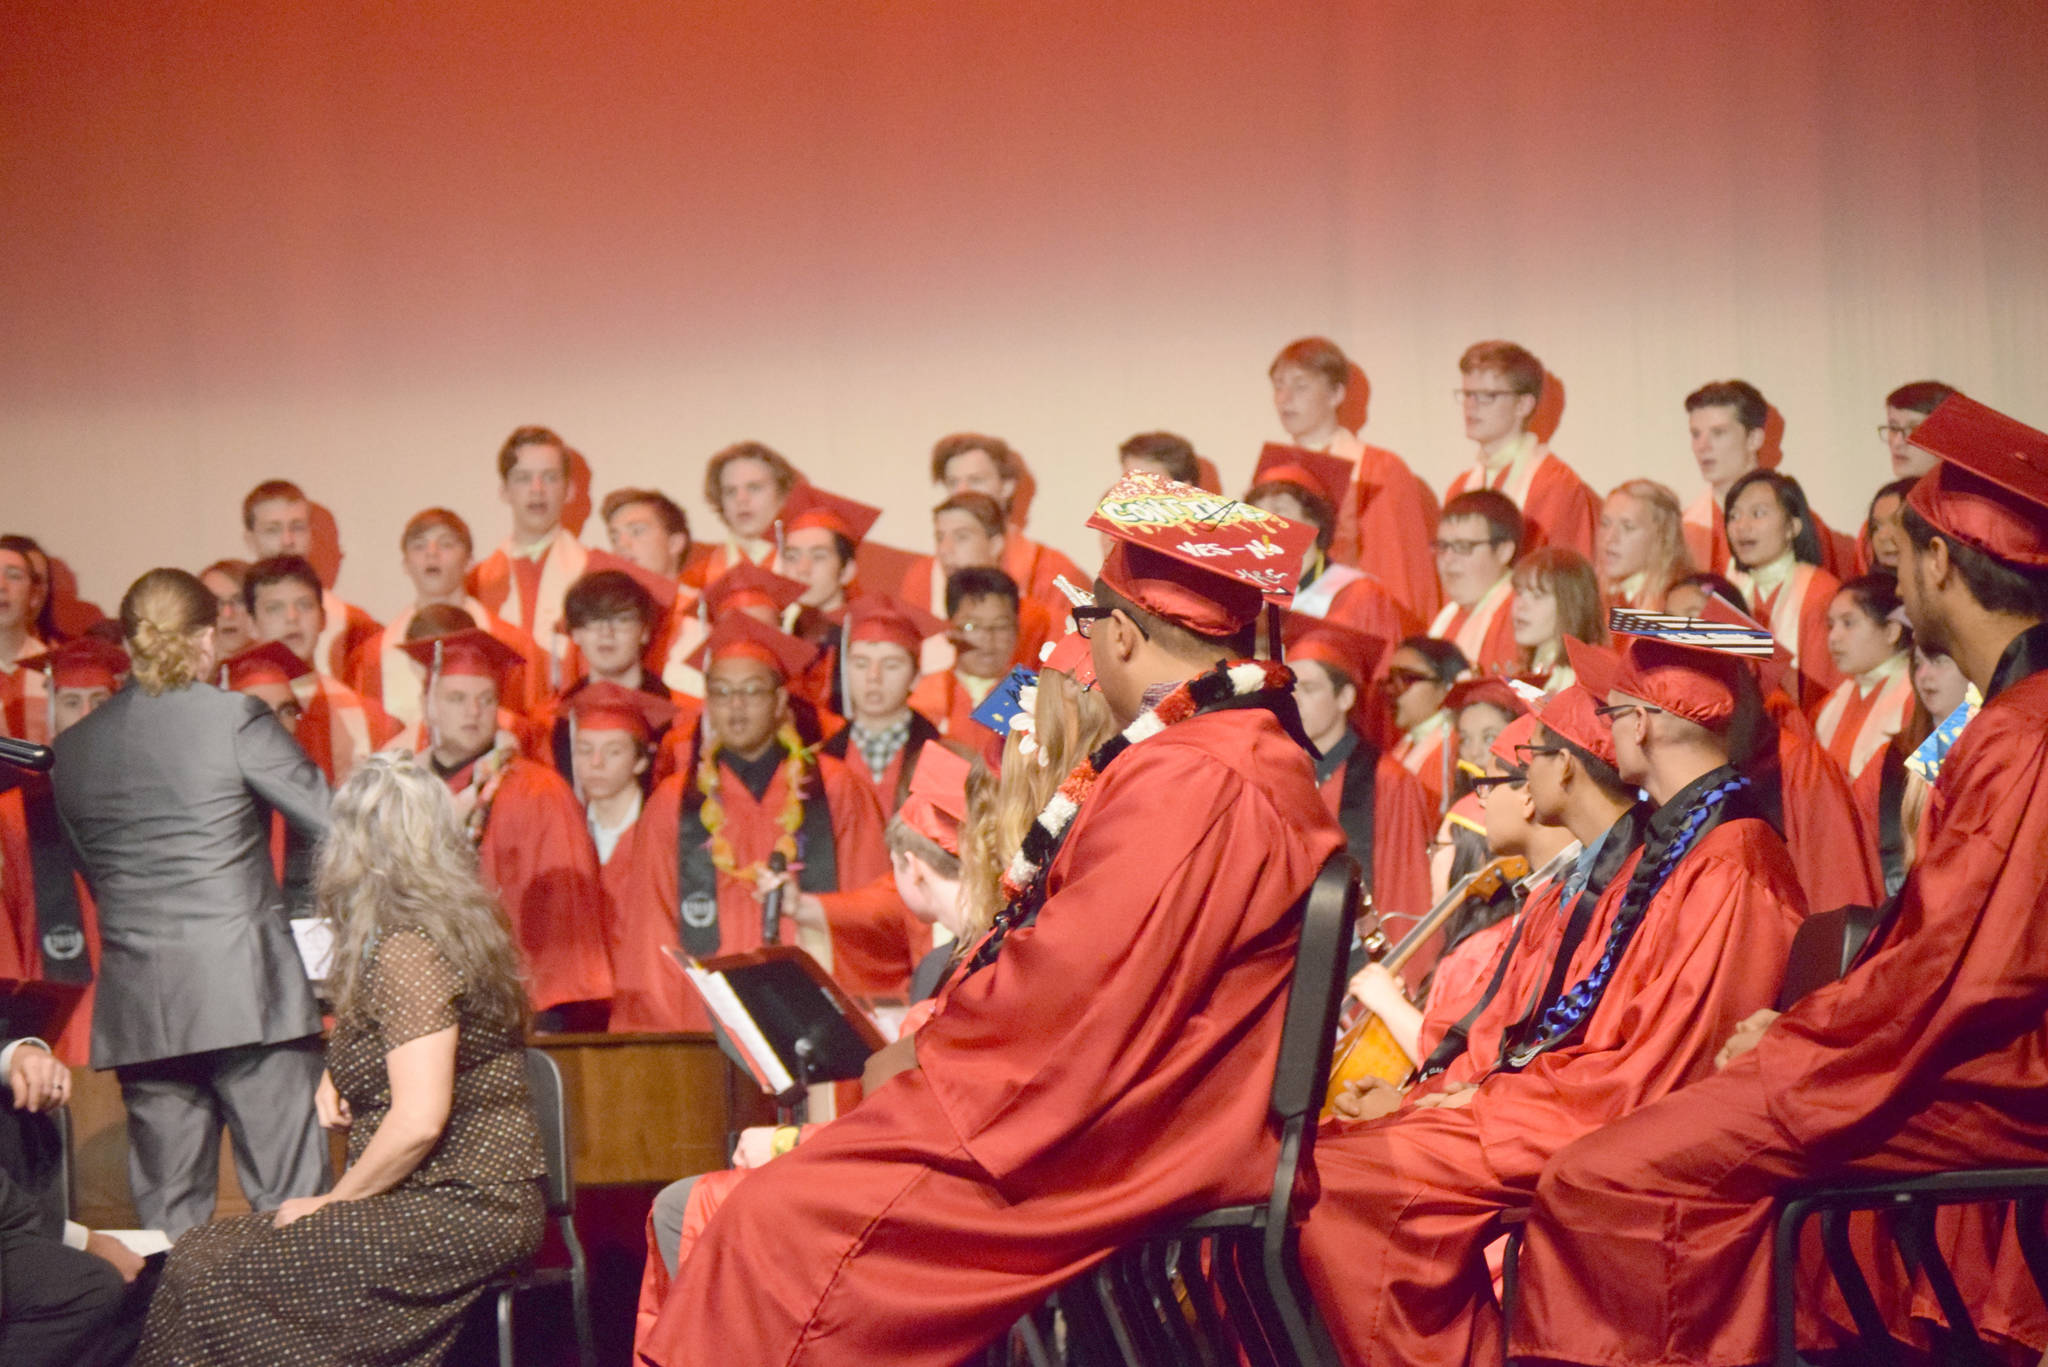 The class of 2019 listens to the choir perform during the Kenai Central High School 2019 graduation in Kenai, Alaska on May 21, 2019. (Photo by Brian Mazurek/Peninsula Clarion)